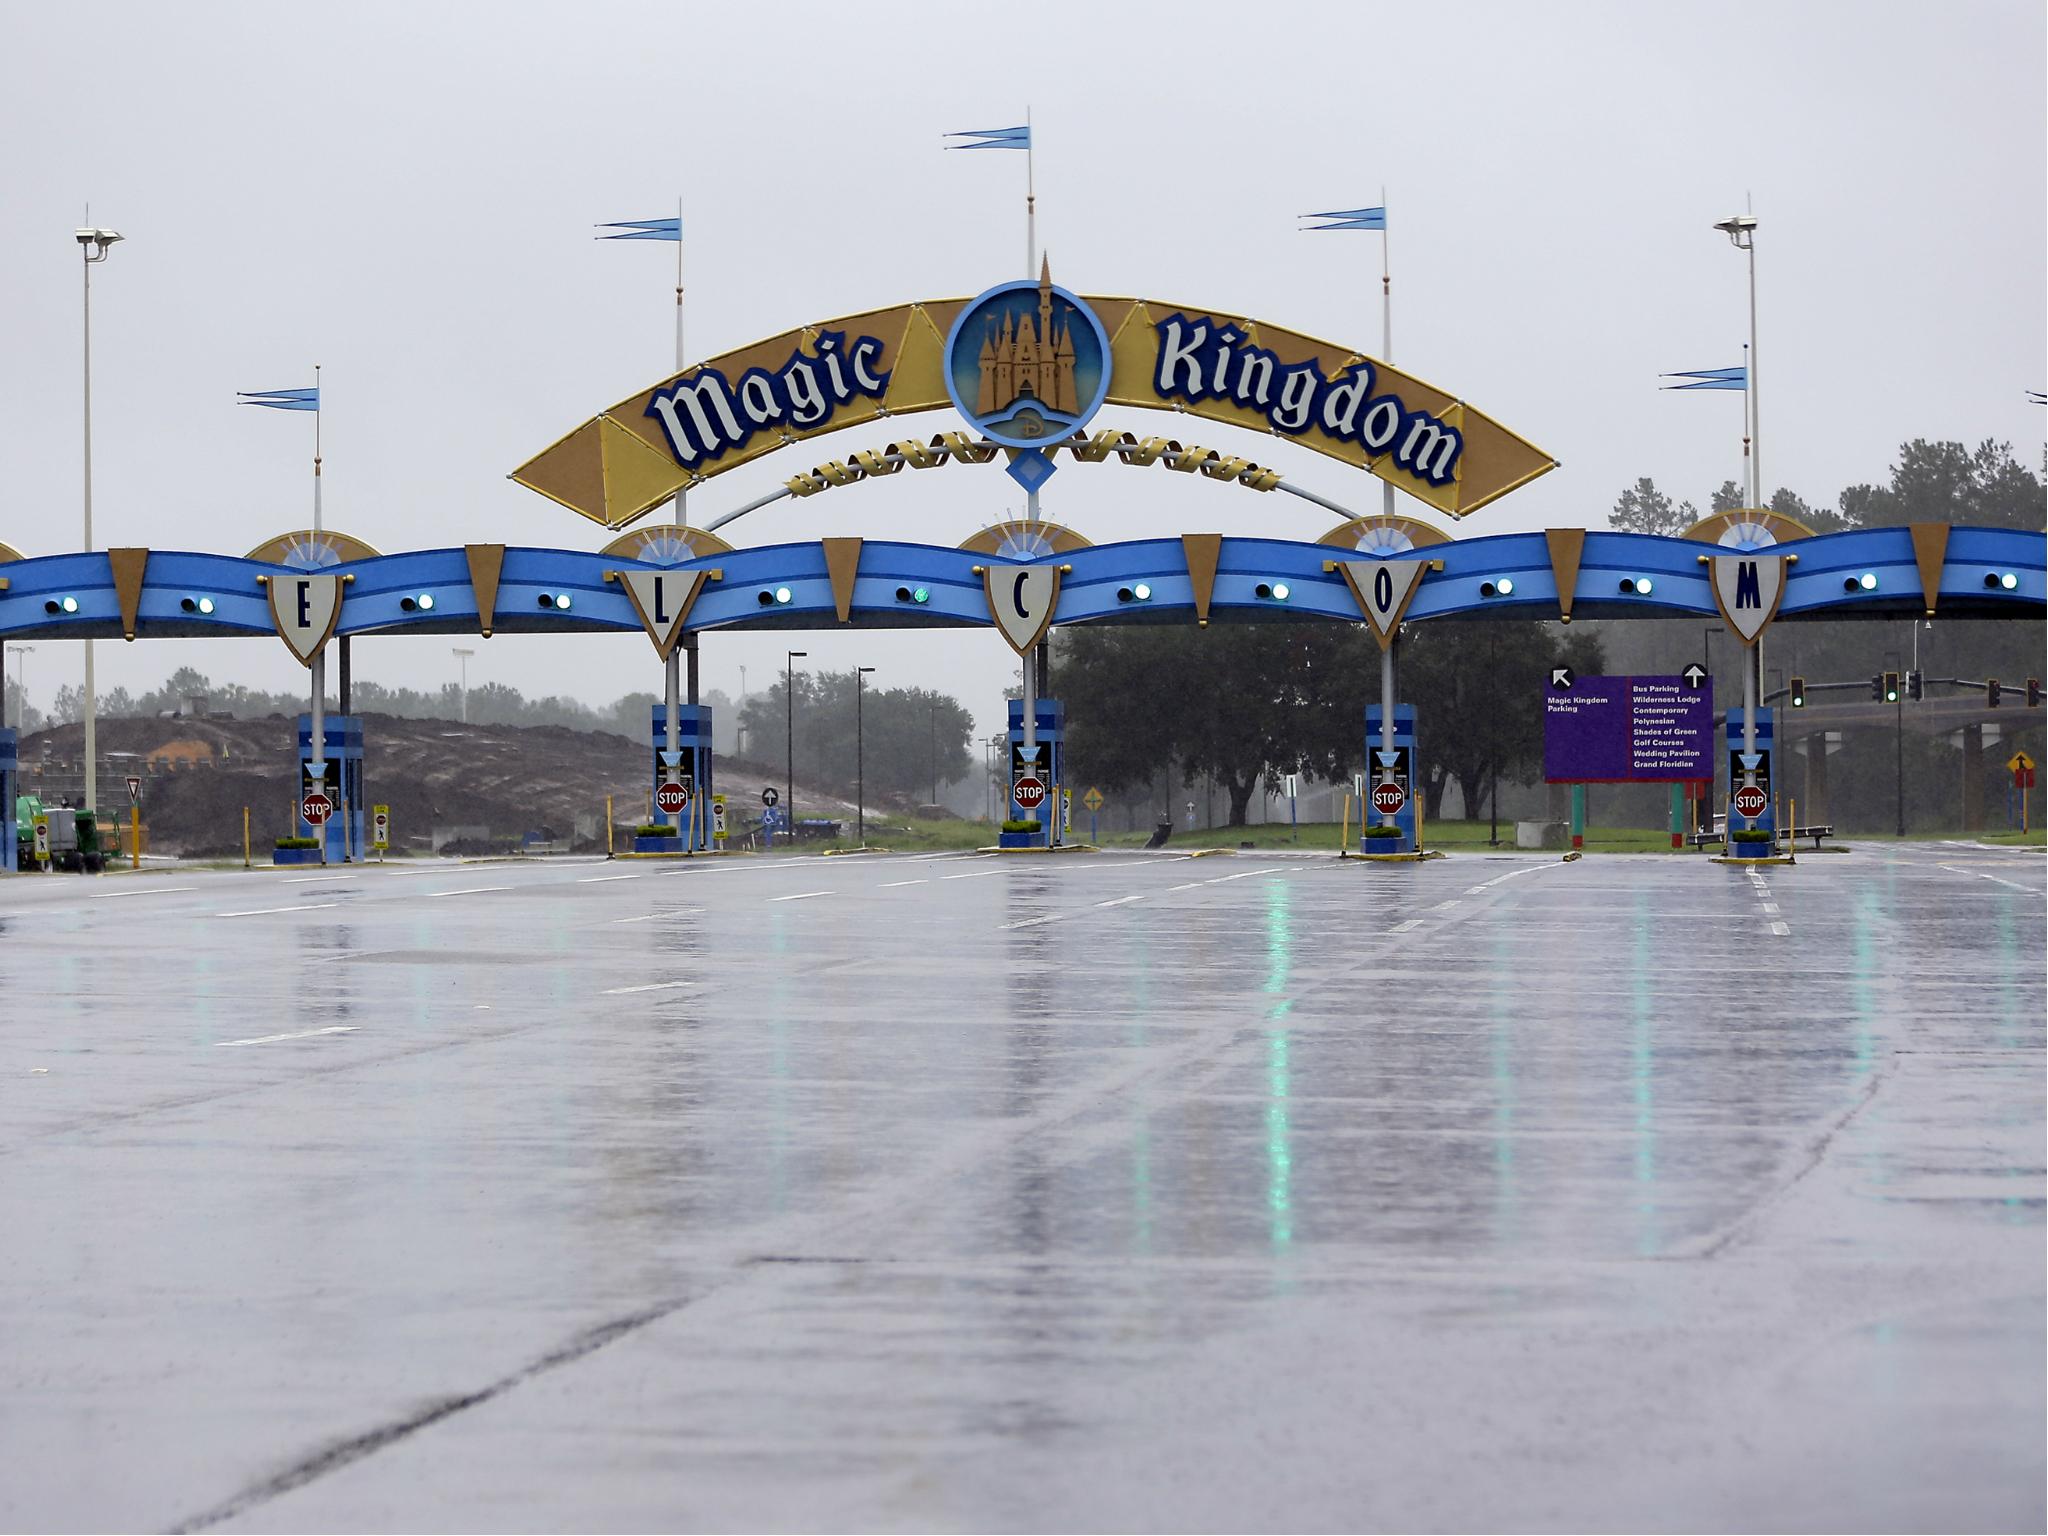 The entrance to the Magic Kingdom at Disney World is empty as the theme park was closed because of Hurricane Irma on 10 September 2017.